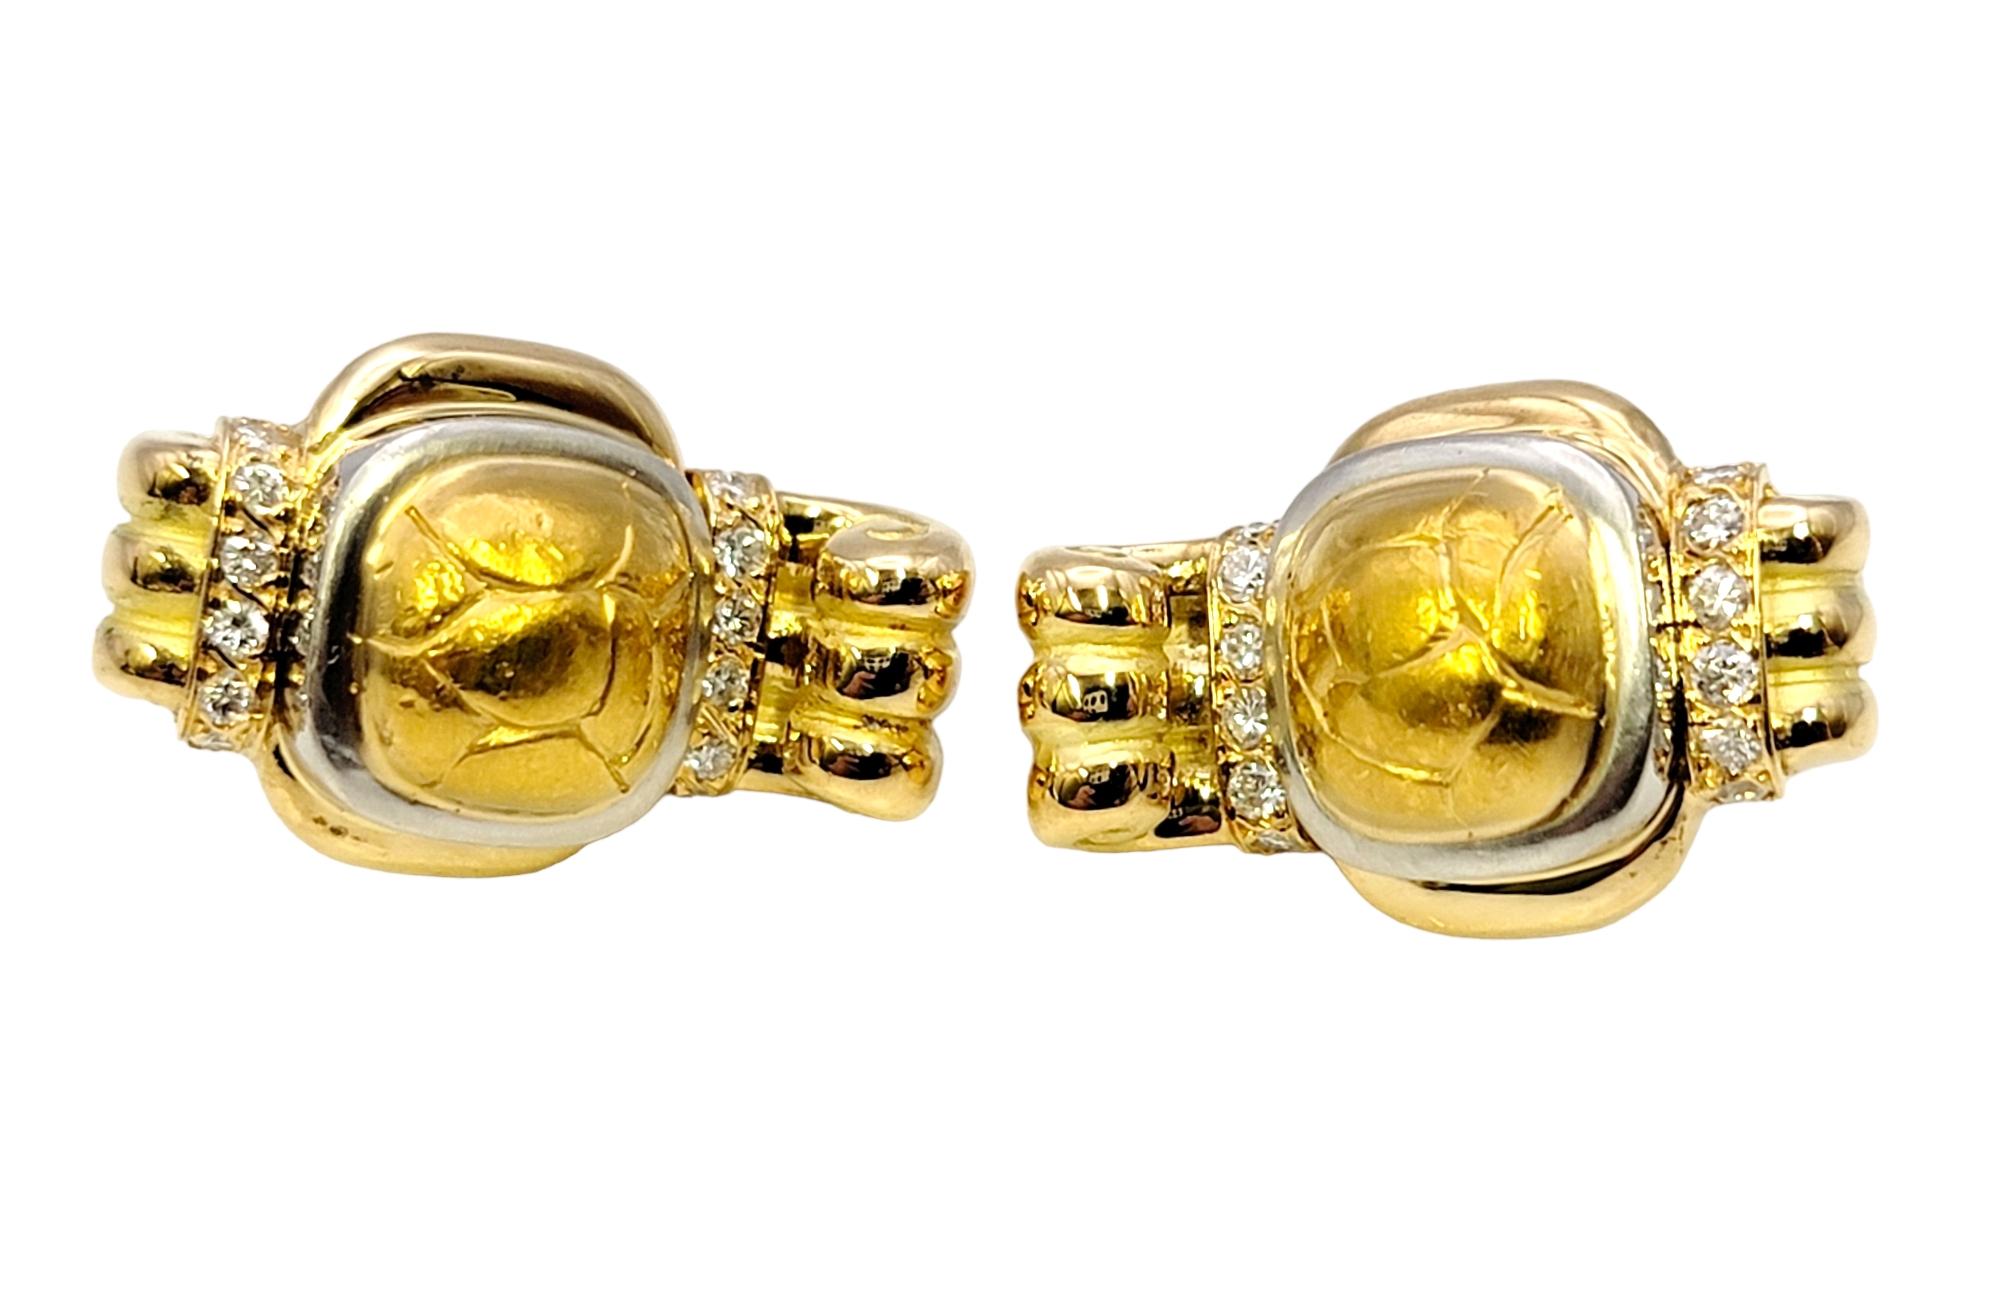 Round Cut Chaumet 18 Karat Yellow Gold Nugget Style Clip-On Stud Earrings with Diamonds For Sale